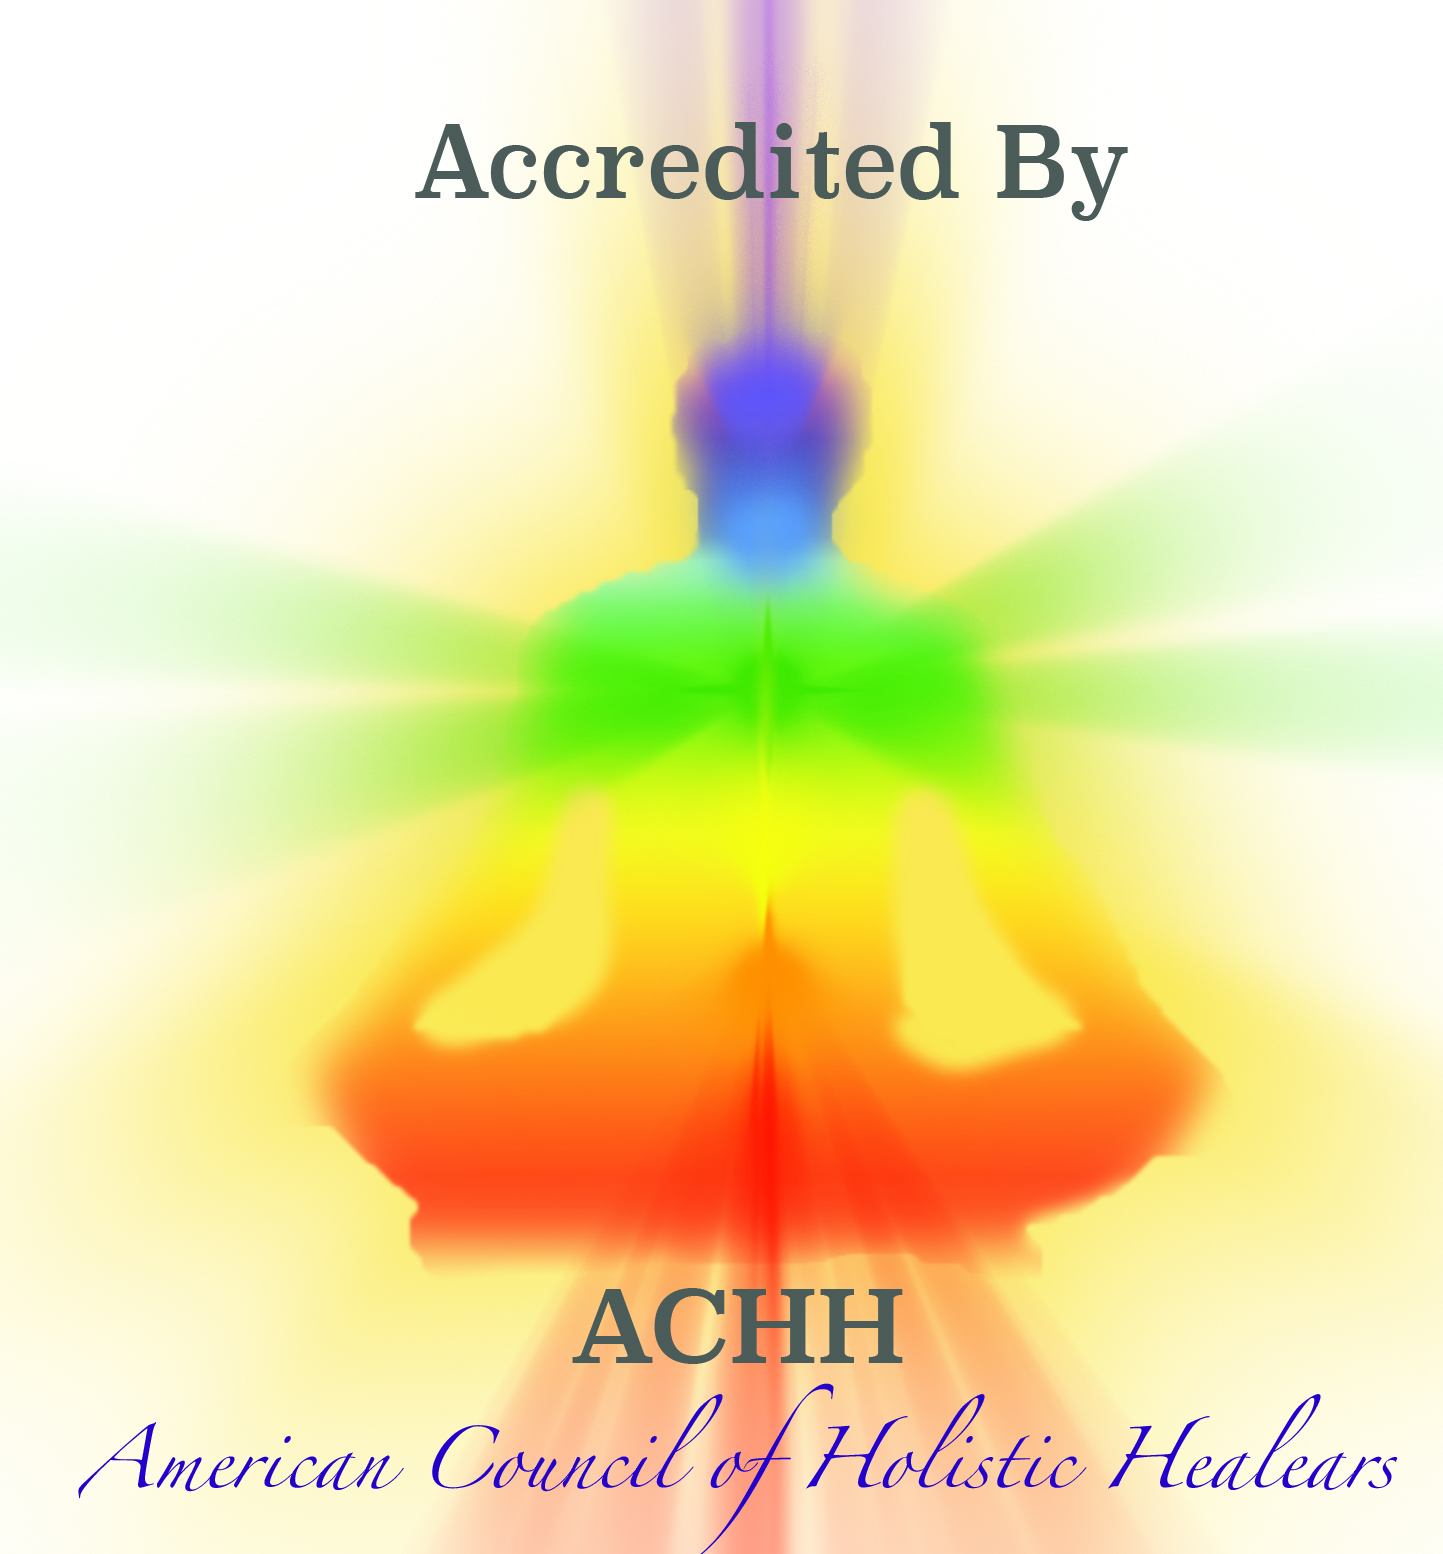 Accredited by The American Council of Holistic Healers